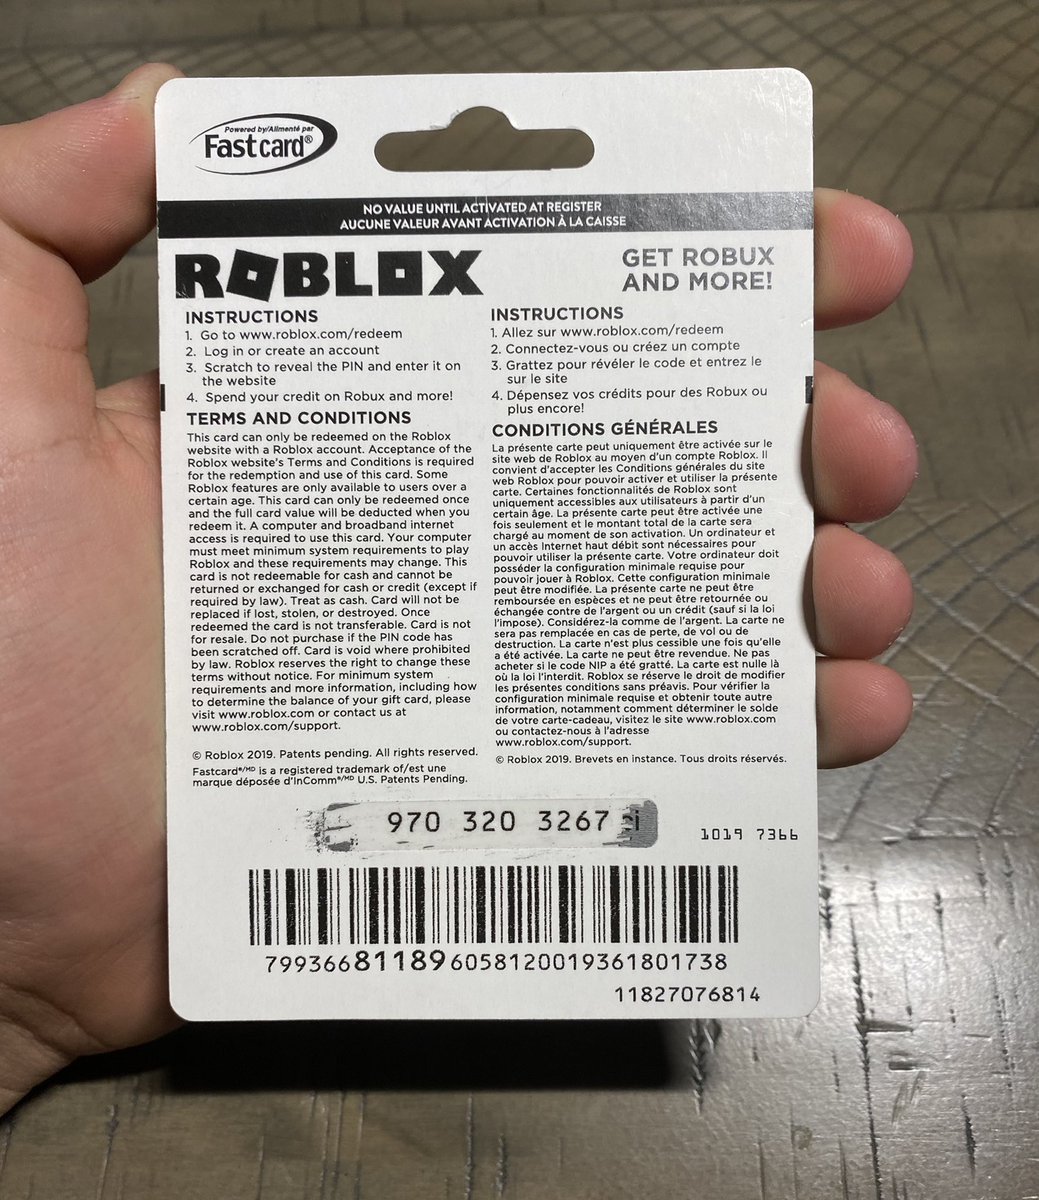 Model8197 on X: Which Robux Gift Card do you want?